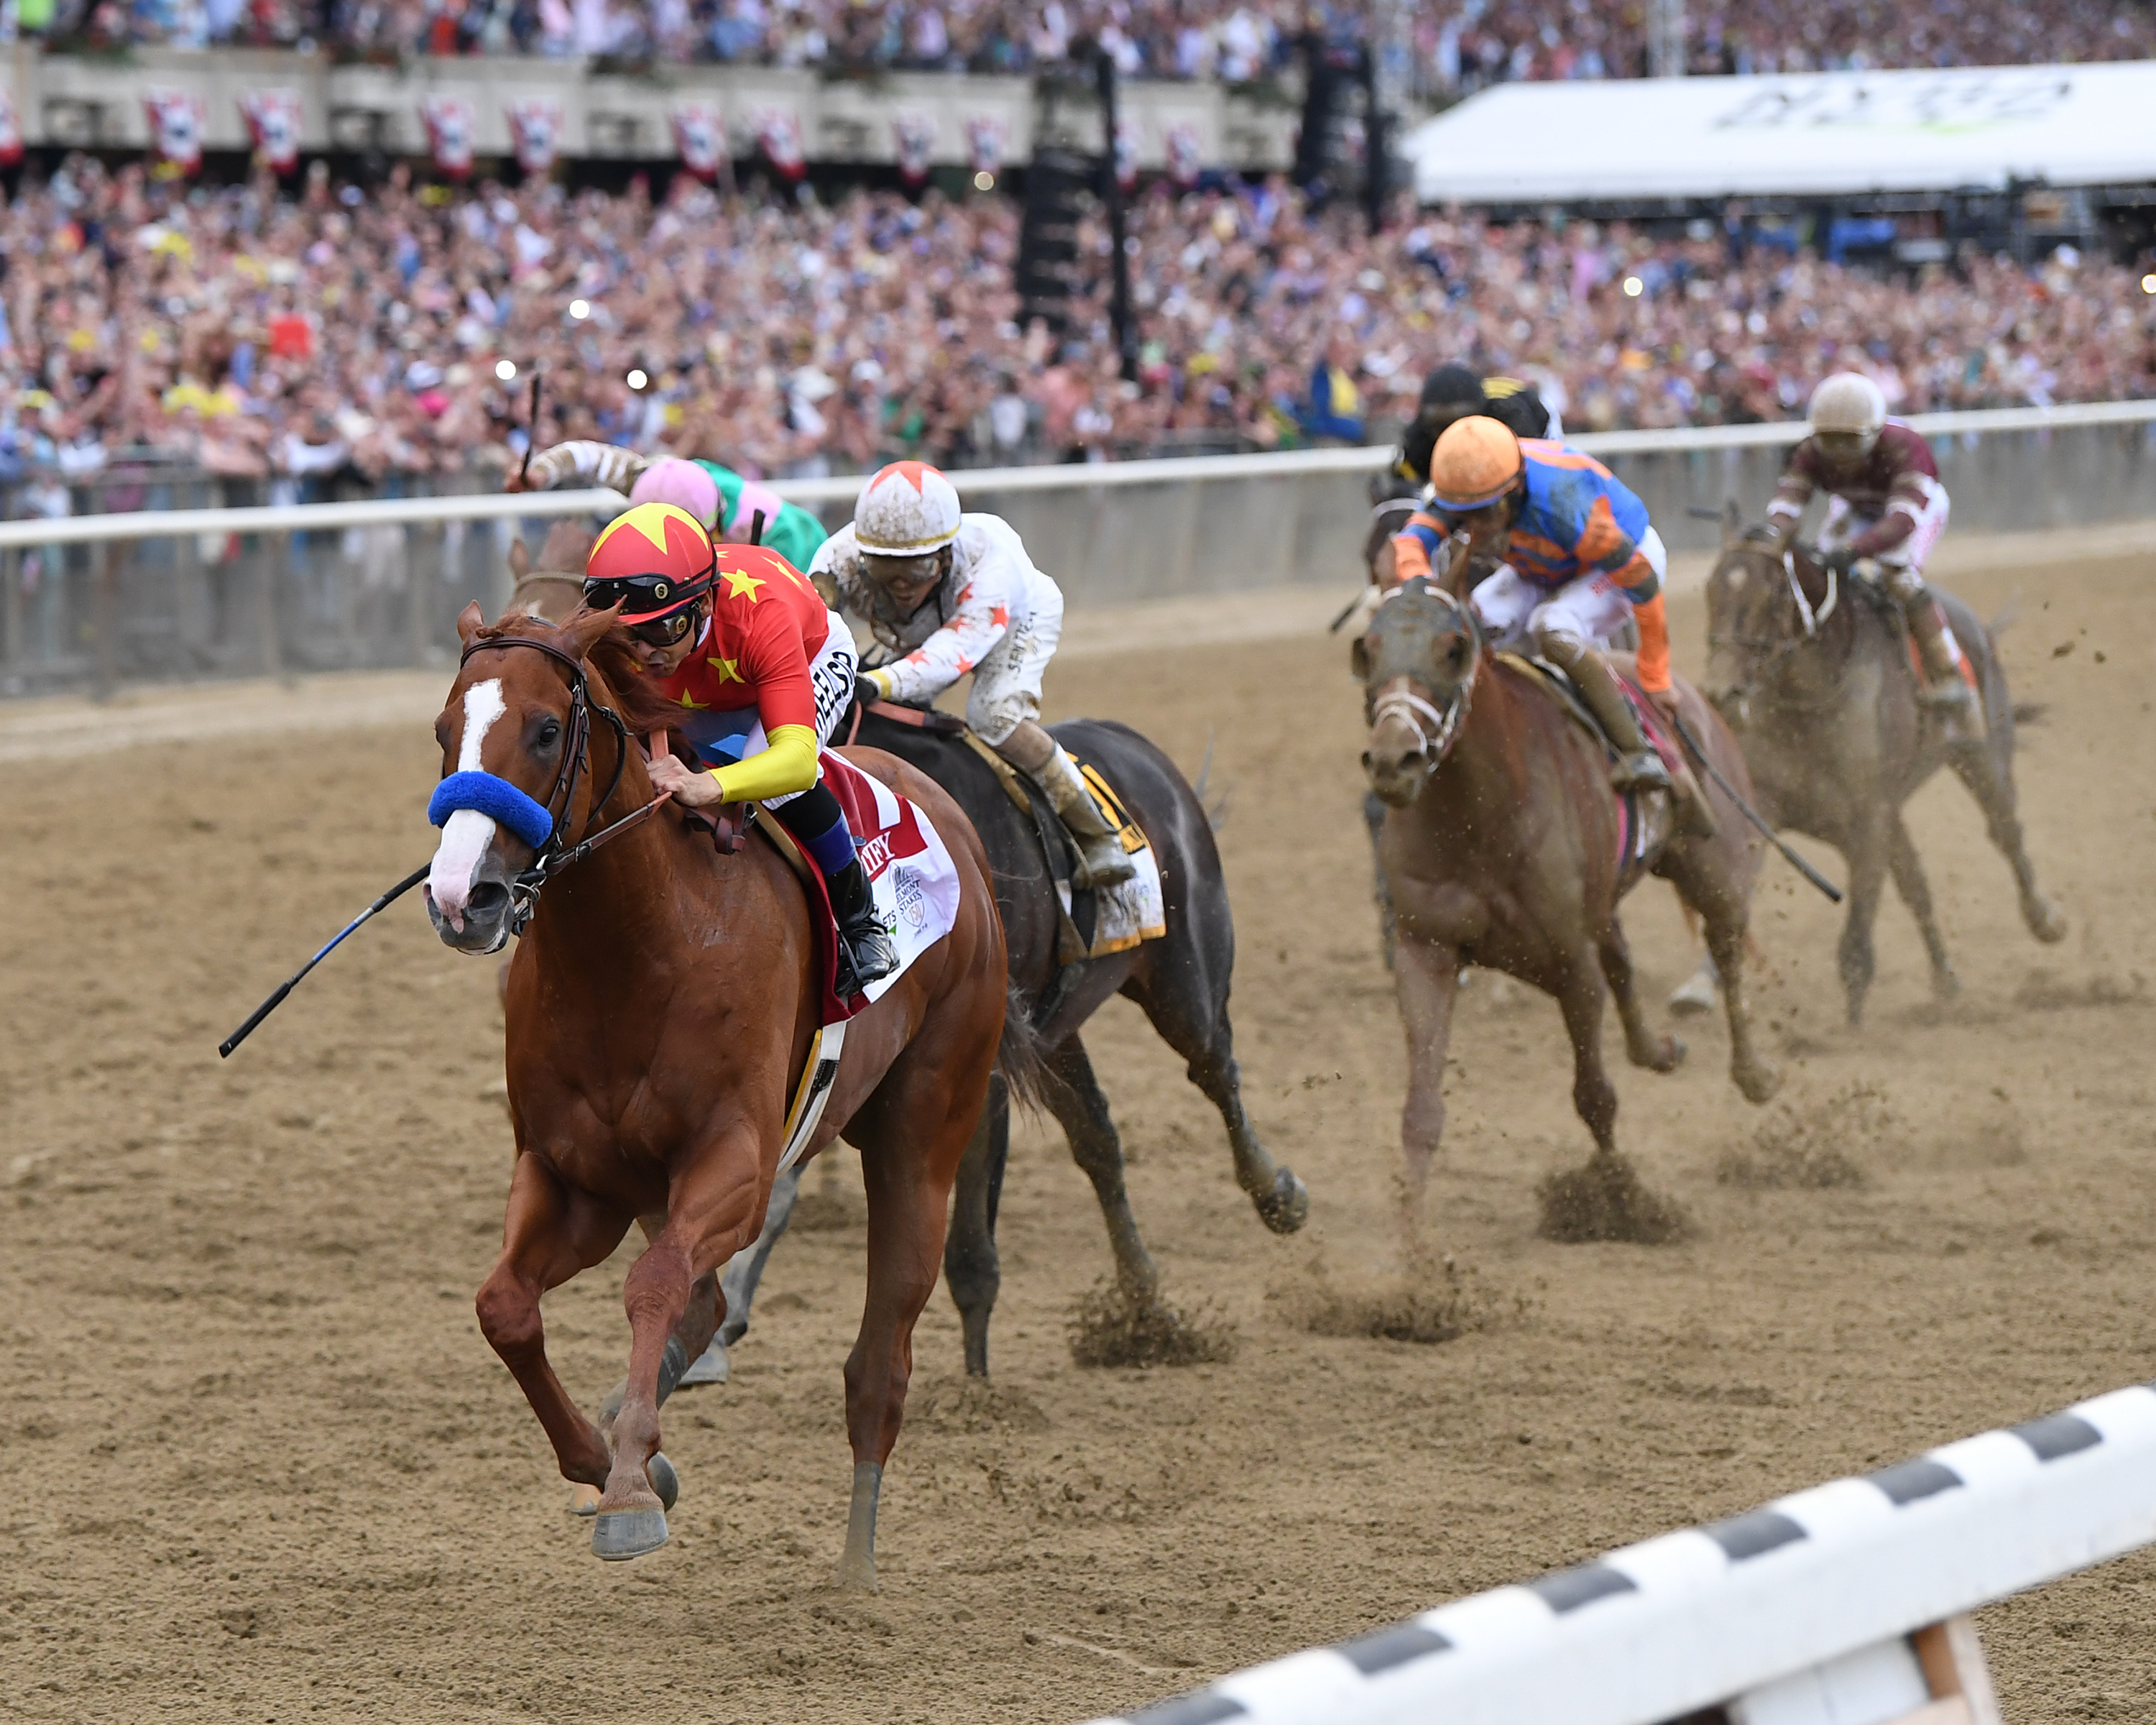 Still going strong: Justify and Mike Smith maintain momentum all the way to the line with Gronkowski, Hofburg (pink cap, mainly hidden) and Vino Rosso battling in vain. Photo: Chelsea Durand/NYRA.com